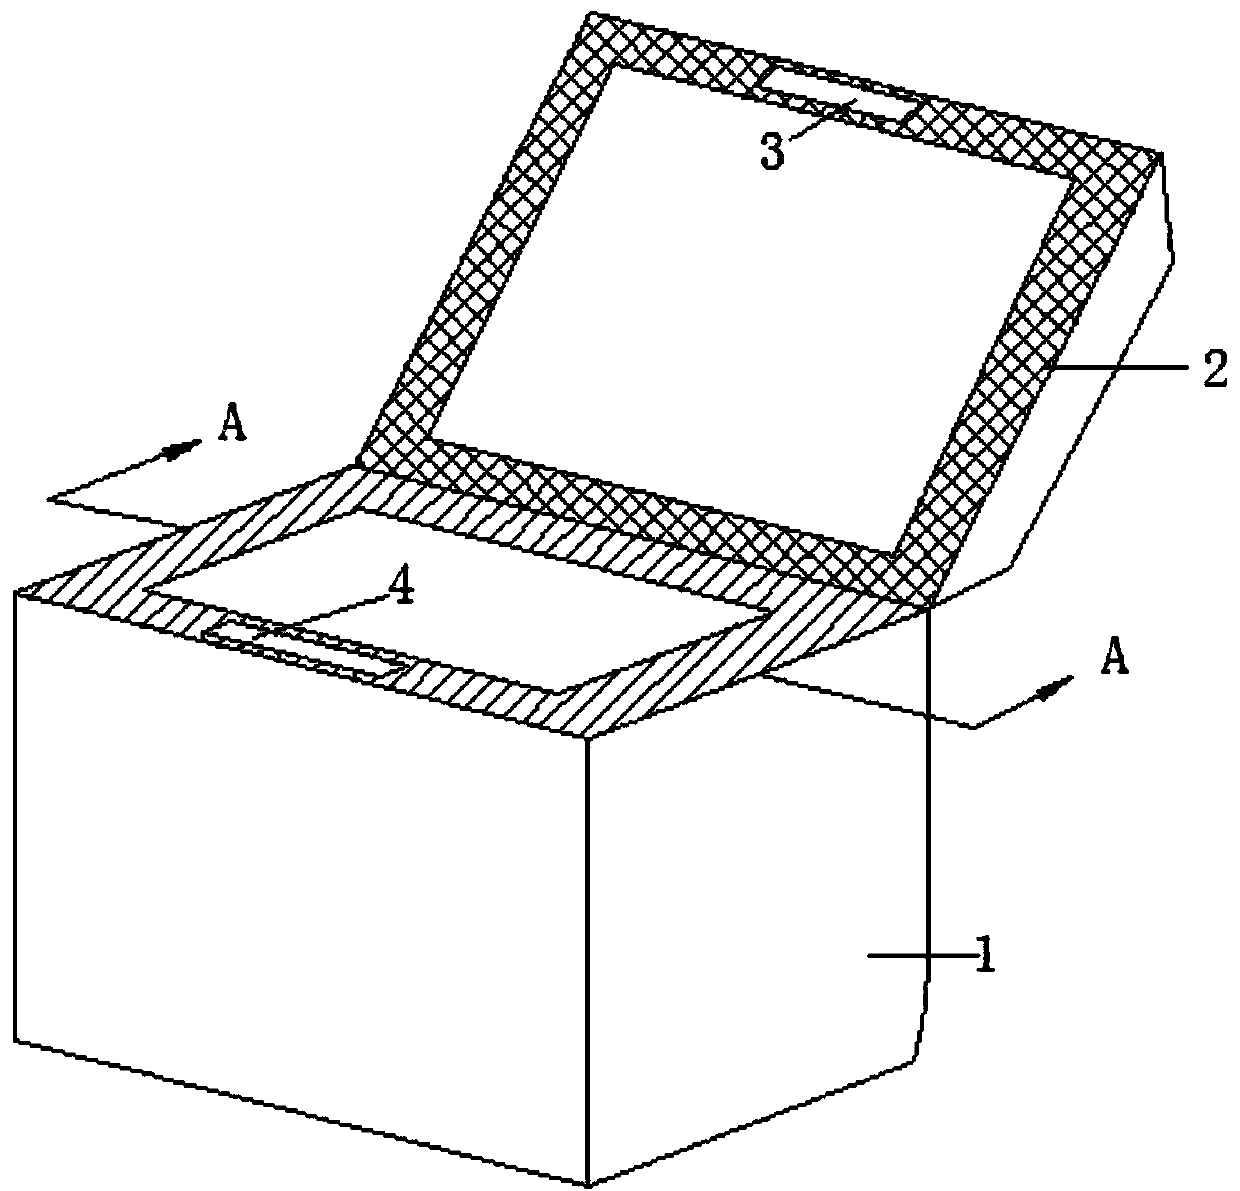 An equipment box for storing electric tools provided with a safety protection structure